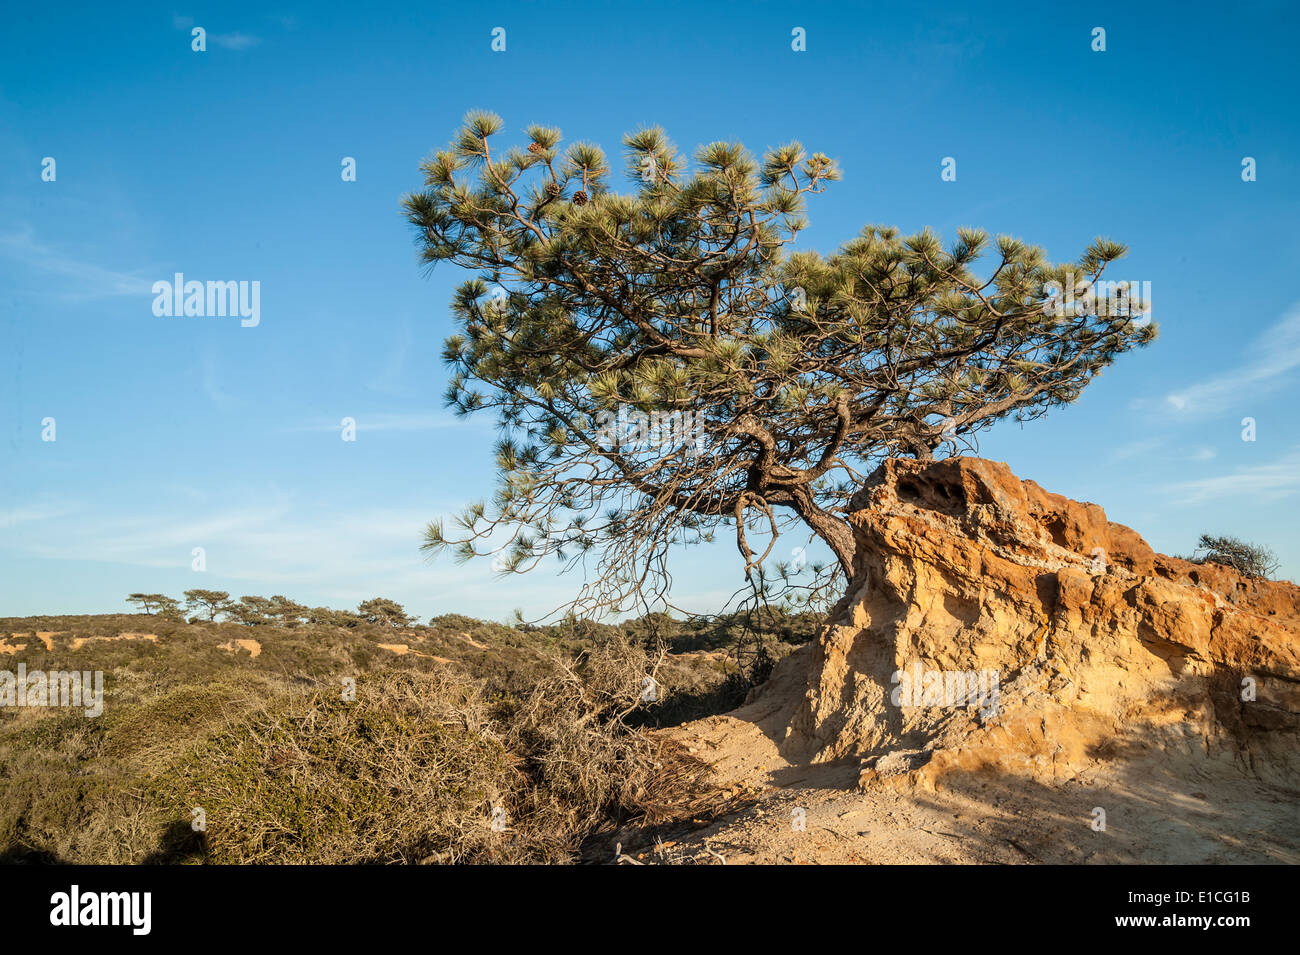 Eroded cliff with Torry Pine tree,Torry Pines State Park, La Jolla, California Stock Photo